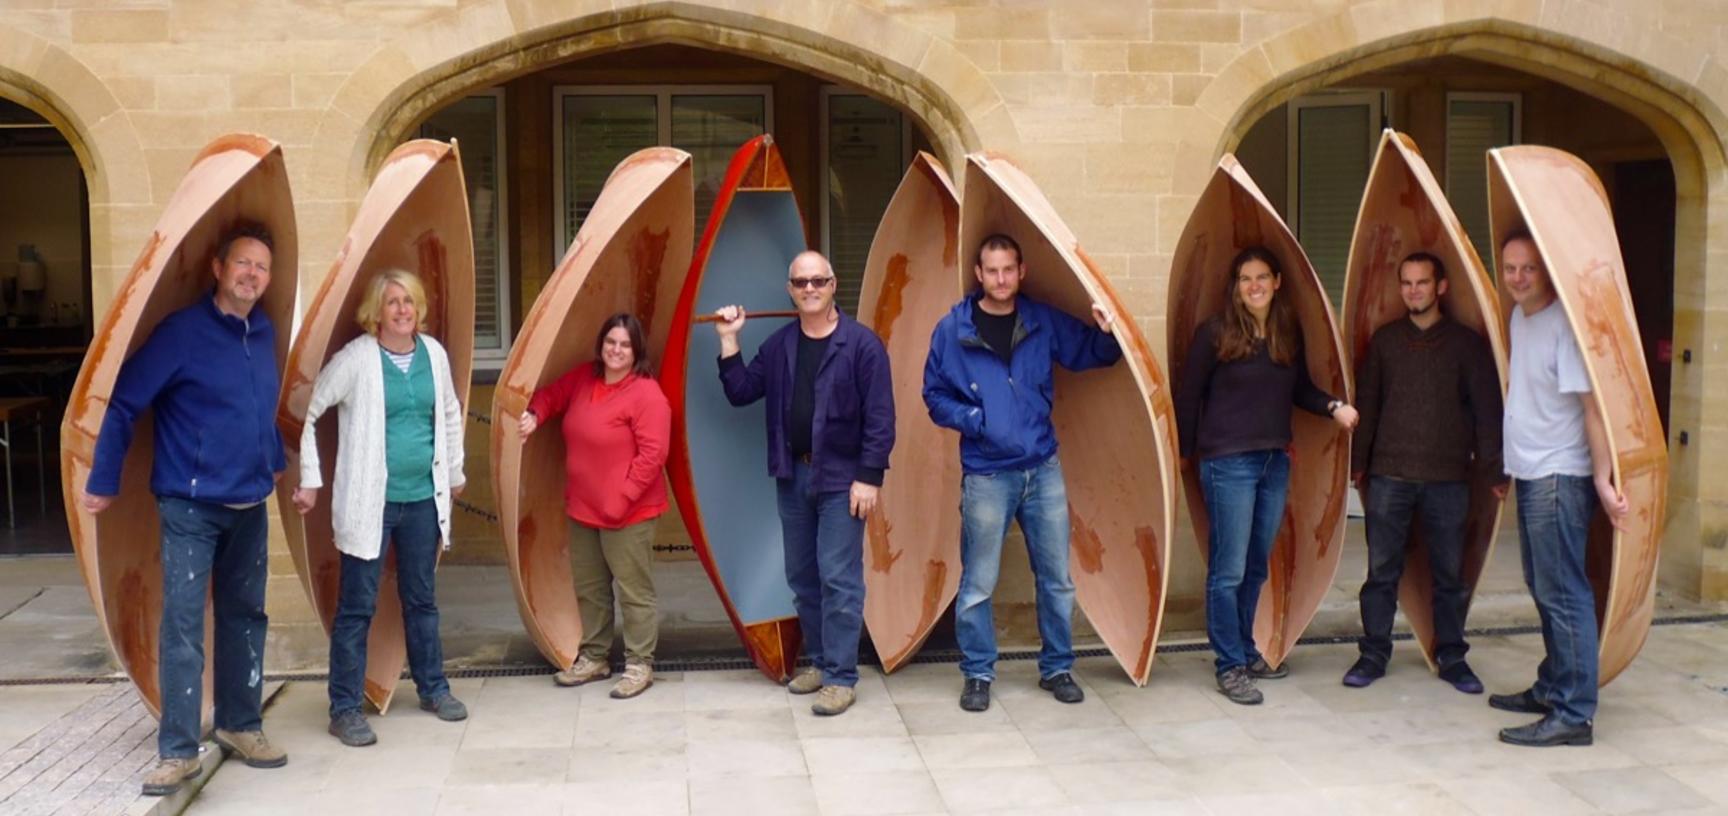 Nessmuk canoe workshop, 2014. These one-man, plywood canoes were put to the test on Oxford’s canals. They were inspired by stitched canoes in the collections used by Algonquian-speaking peoples of north-eastern USA and Canada.